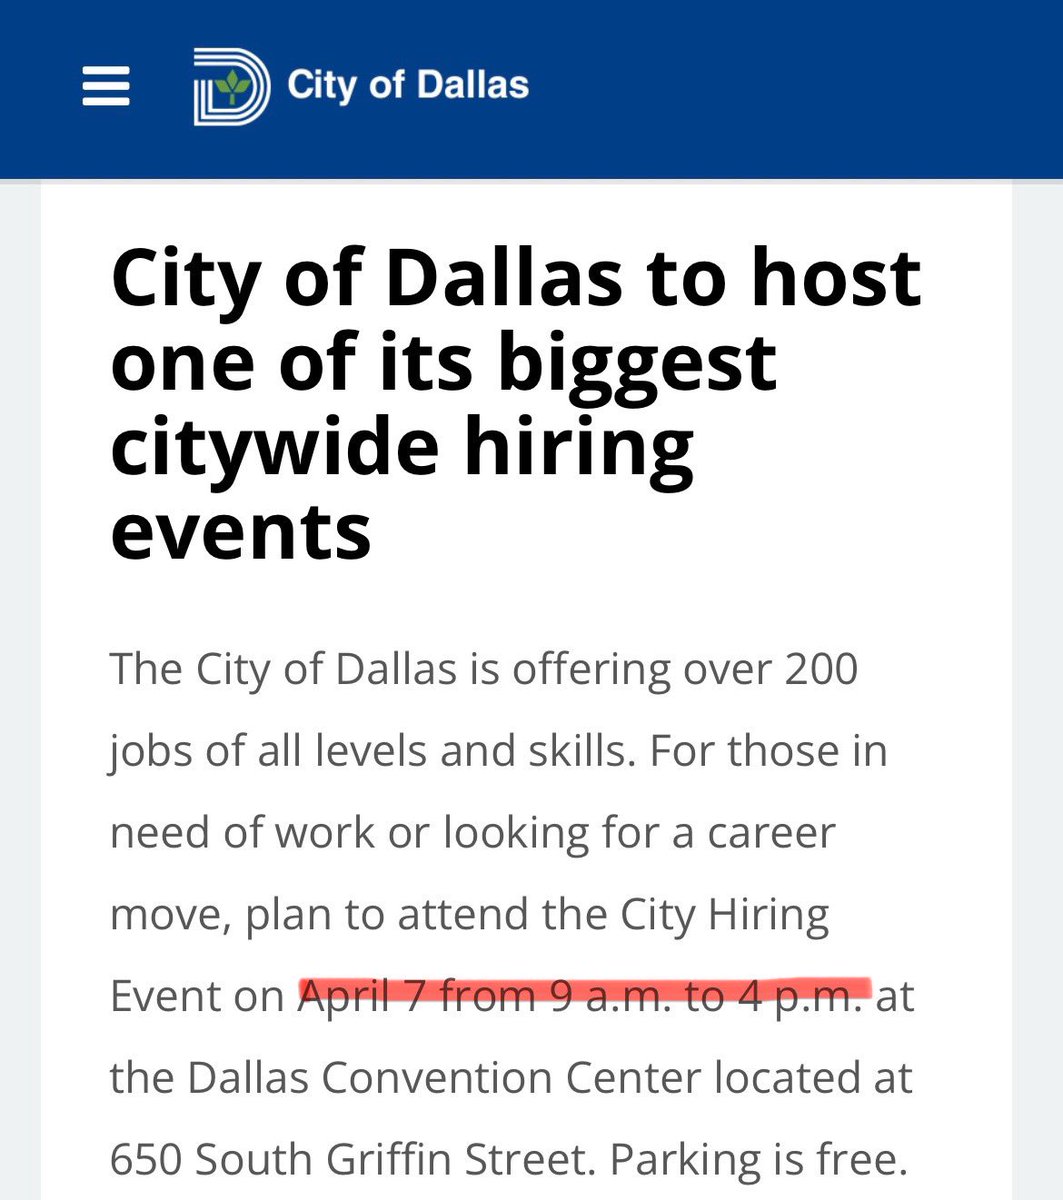 🚨𝗜𝗻𝗰𝗼𝗿𝗿𝗲𝗰𝘁 𝗜𝗻𝗳𝗼𝗿𝗺𝗮𝘁𝗶𝗼𝗻🚨 Kay Bailey Hutchison Convention Center Dallas is 𝗡𝗢𝗧 hosting a City of Dallas hiring event today as publicized online. This posting is from several years ago. Please do not show up to #KBHCCD today looking to apply for a job.